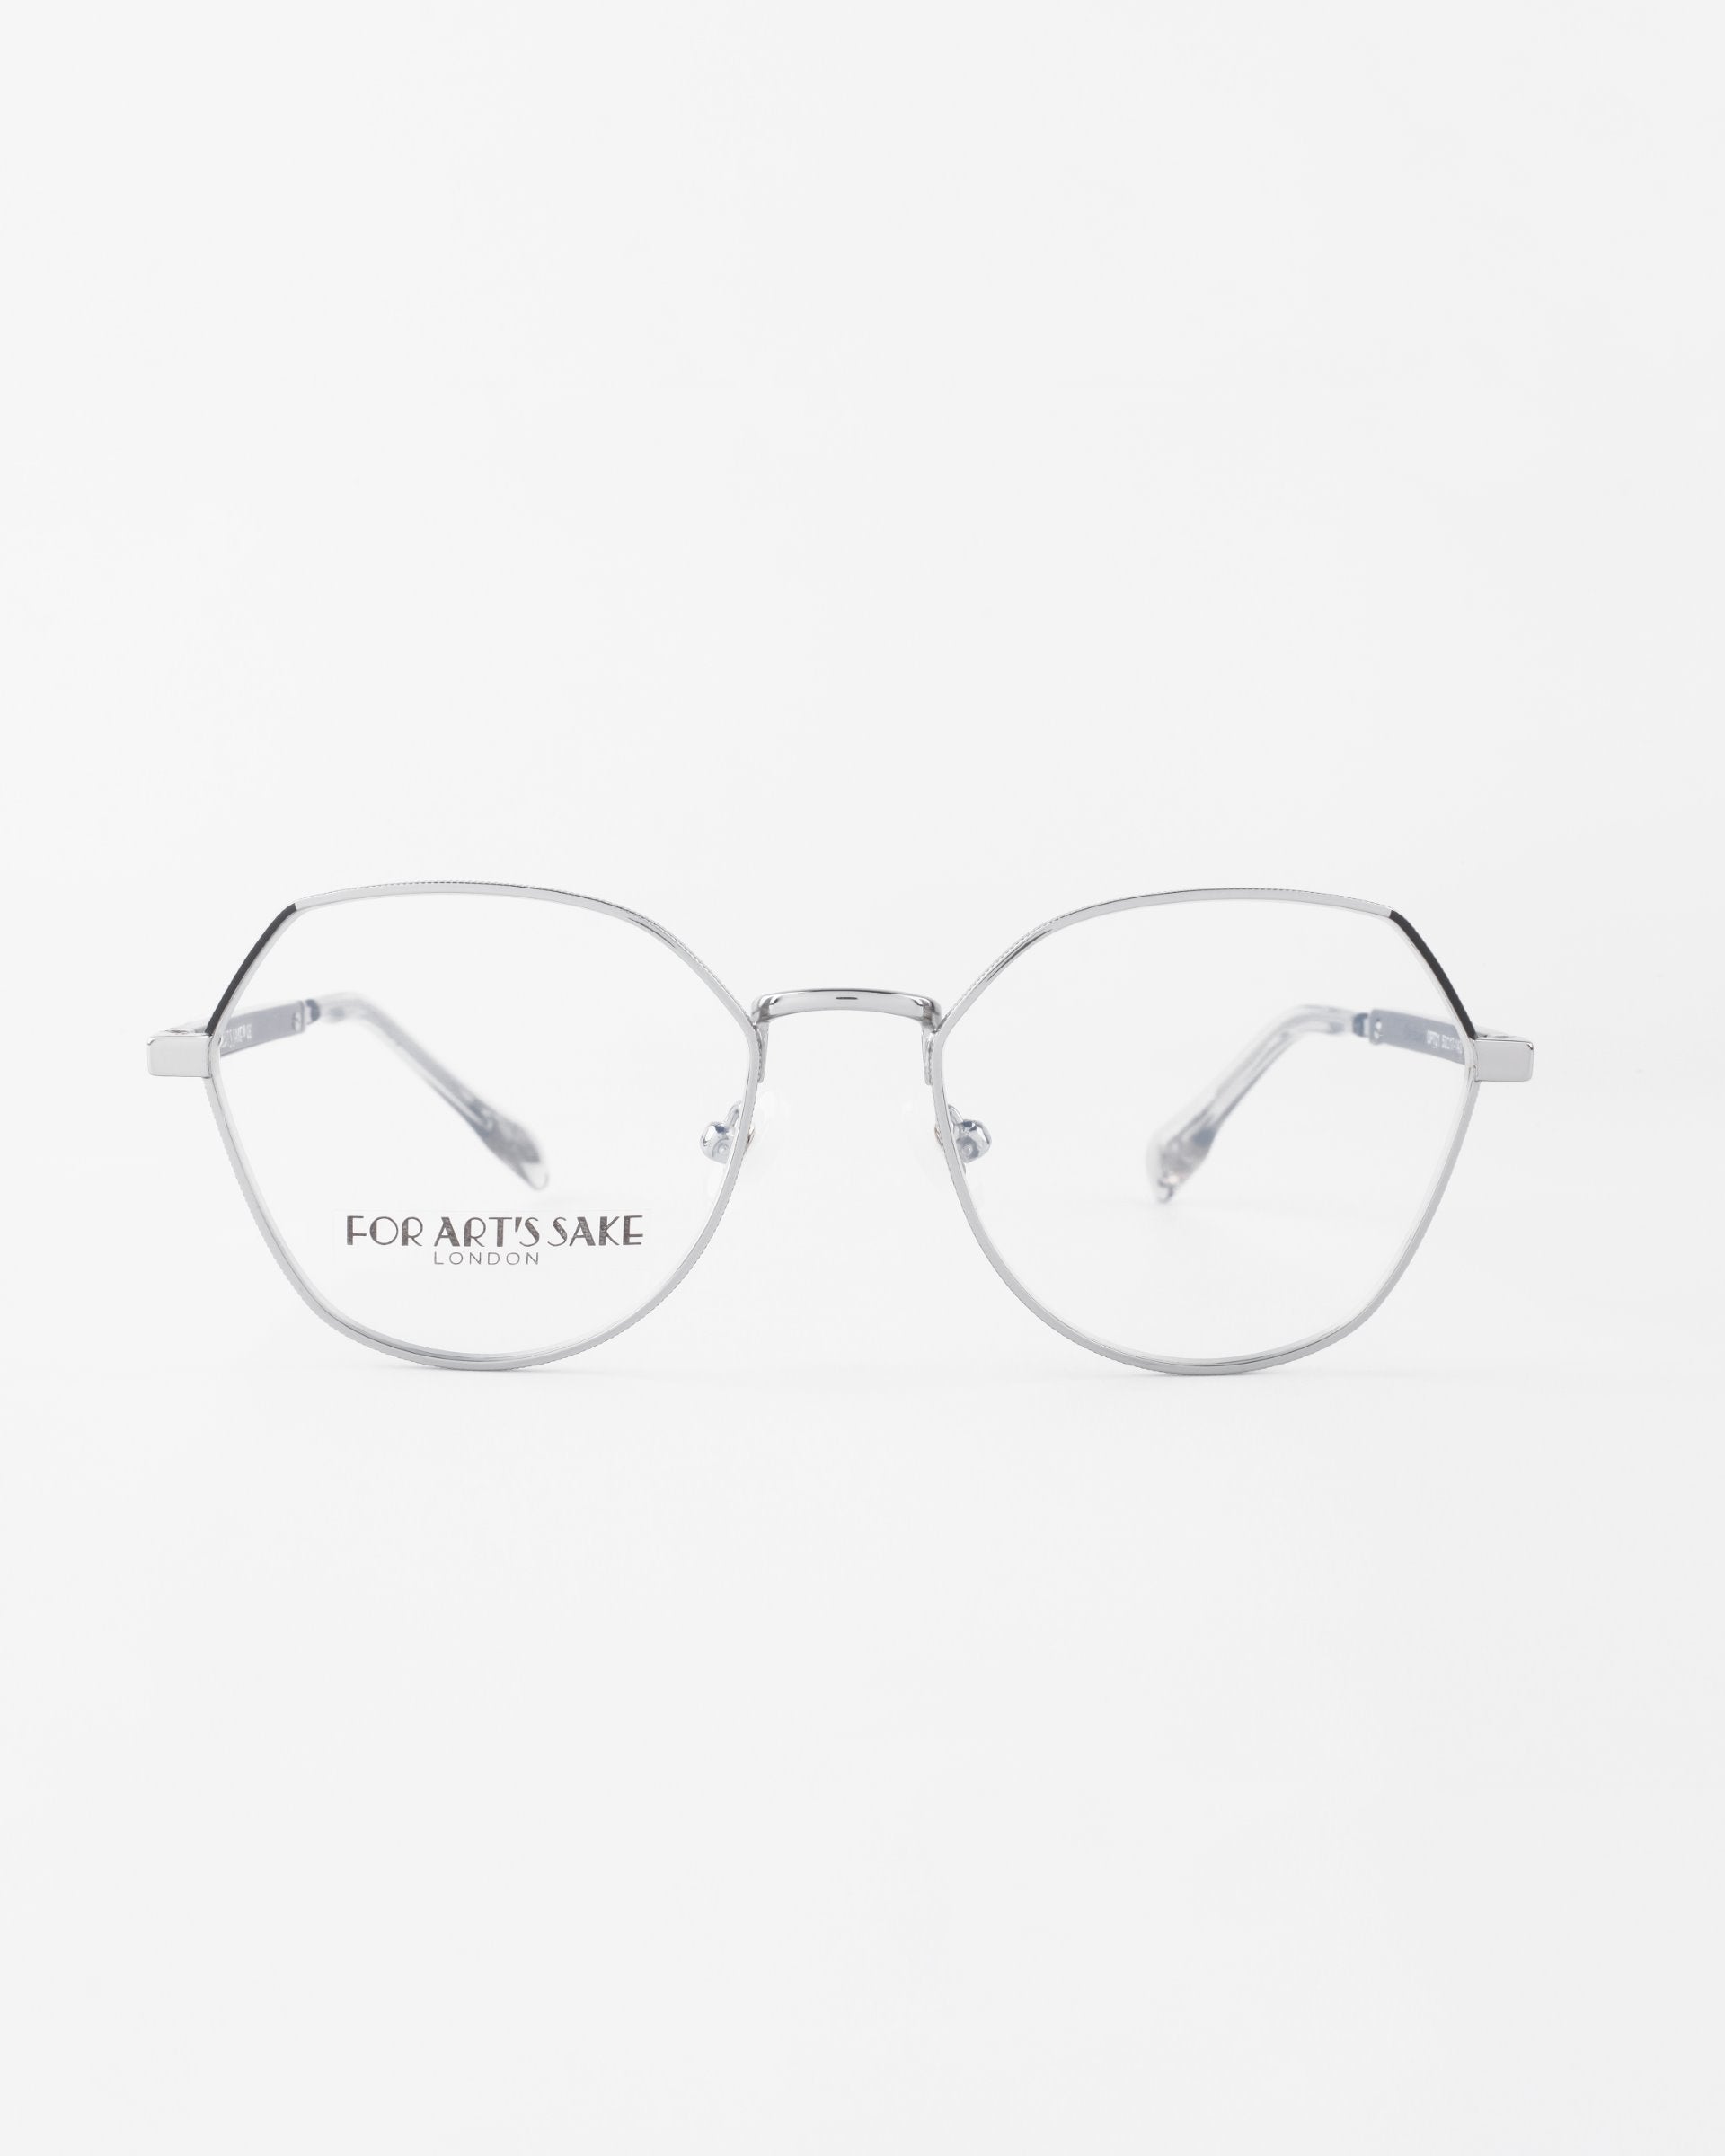 Image of a pair of sleek metal eyeglasses with a minimalist design. Featuring hexagonal gold-plated frames, clear lenses, and thin temples, the Orchard glasses offer both style and functionality. The brand name &quot;For Art&#39;s Sake®&quot; is printed in small text on the left lens. The background is a clean white.